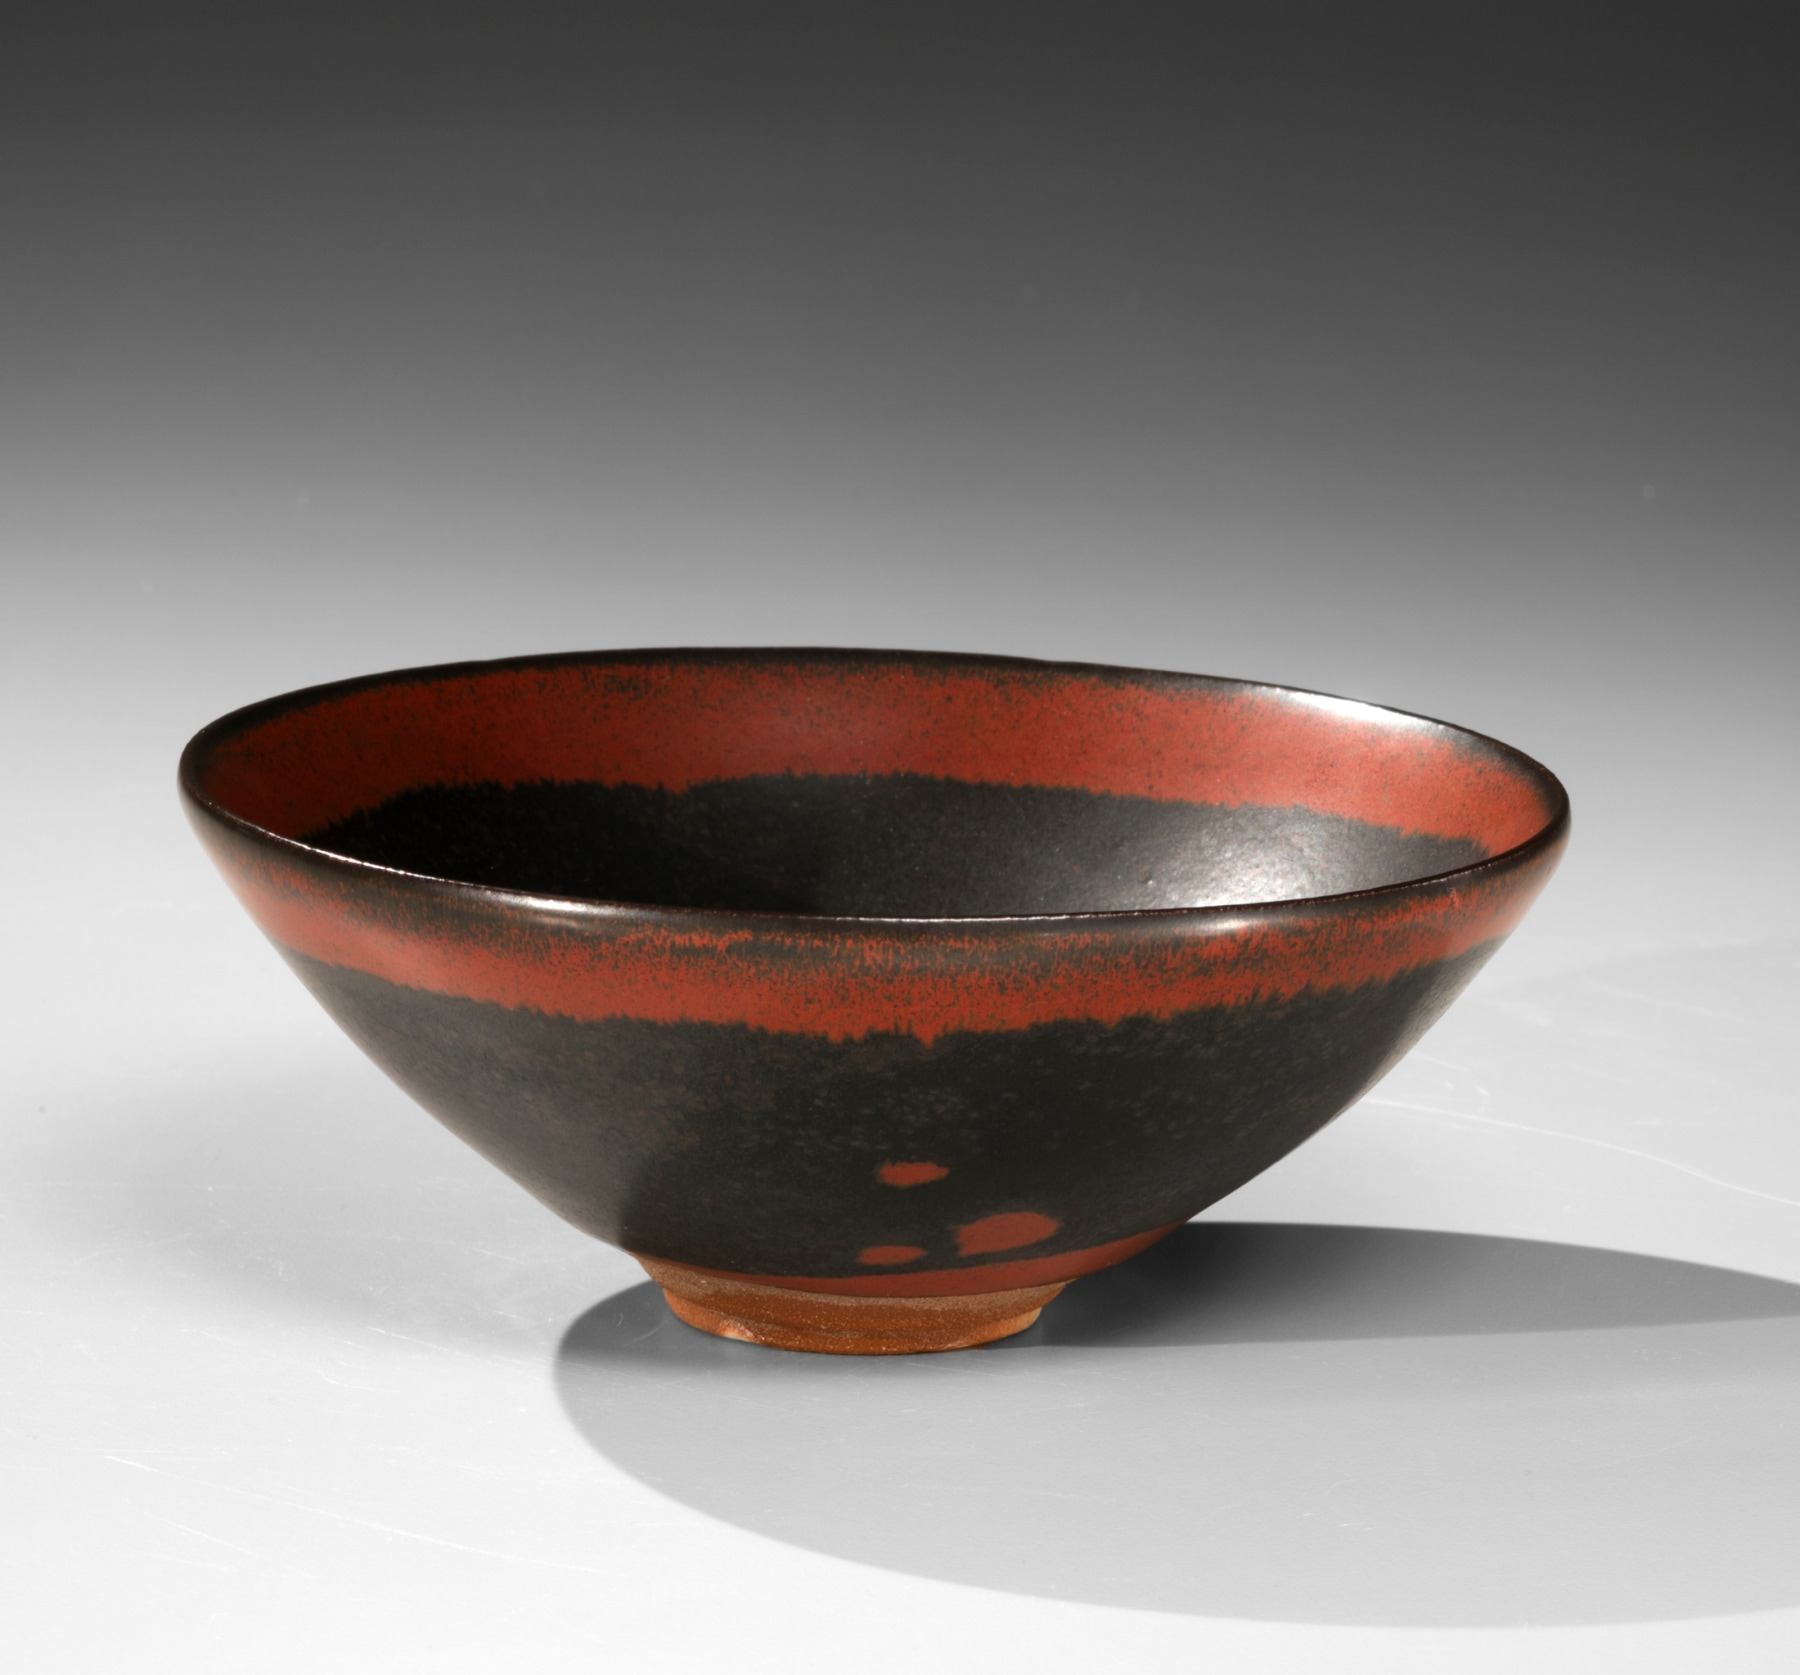 Black bowl with red band around the rim and dot in the interior, ca. 2004